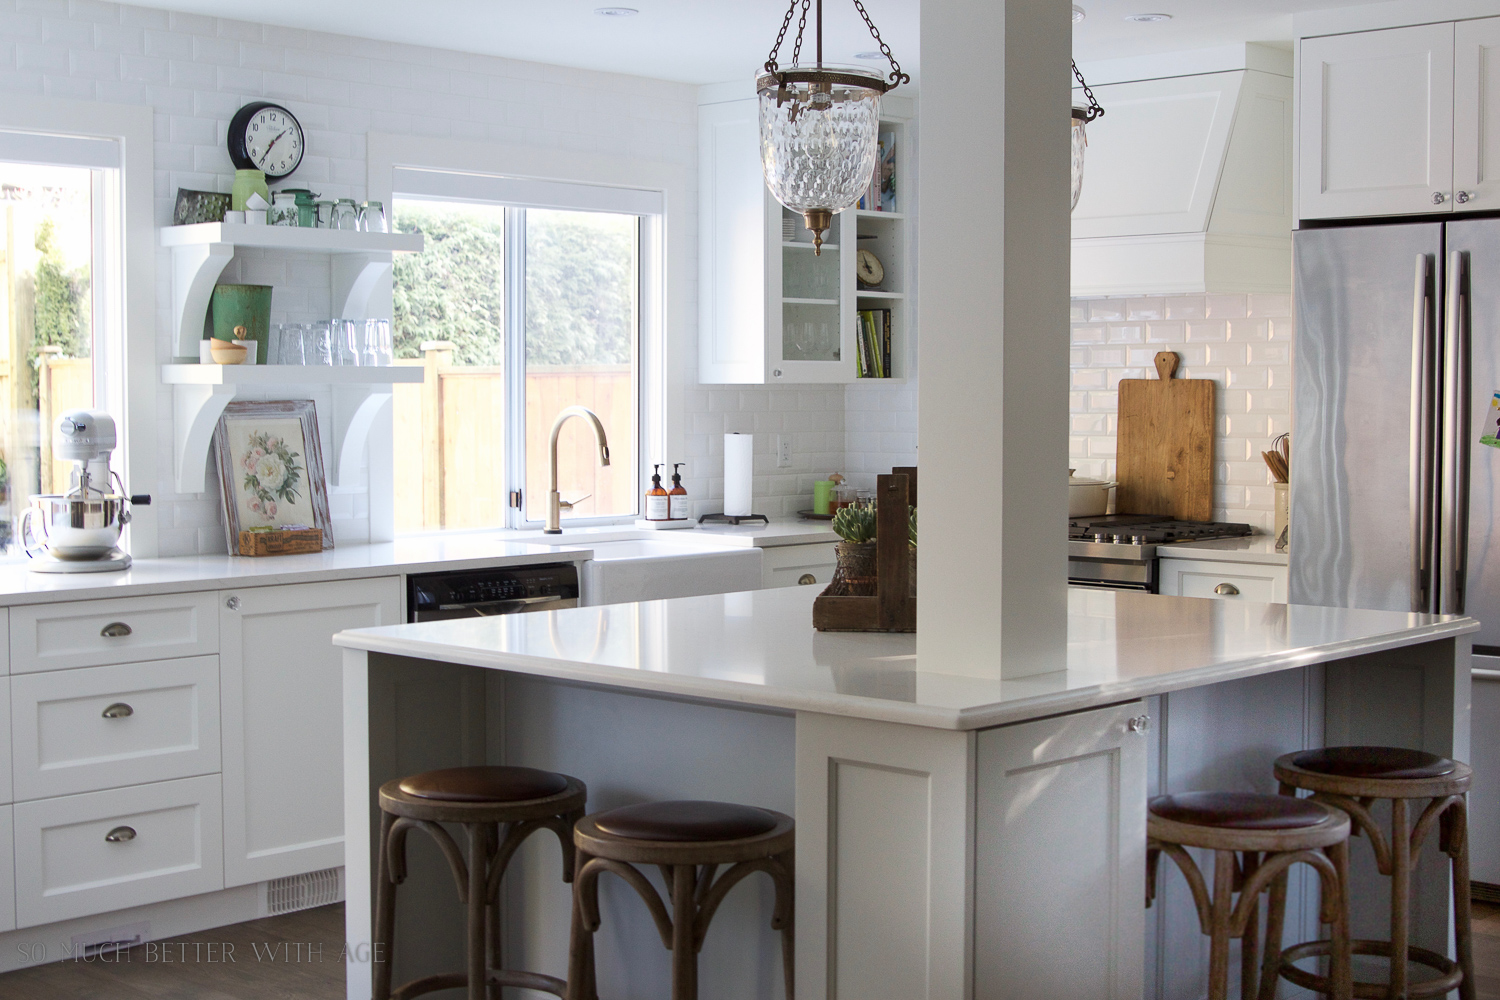 A white kitchen island, with pendant lights and wooden stools.